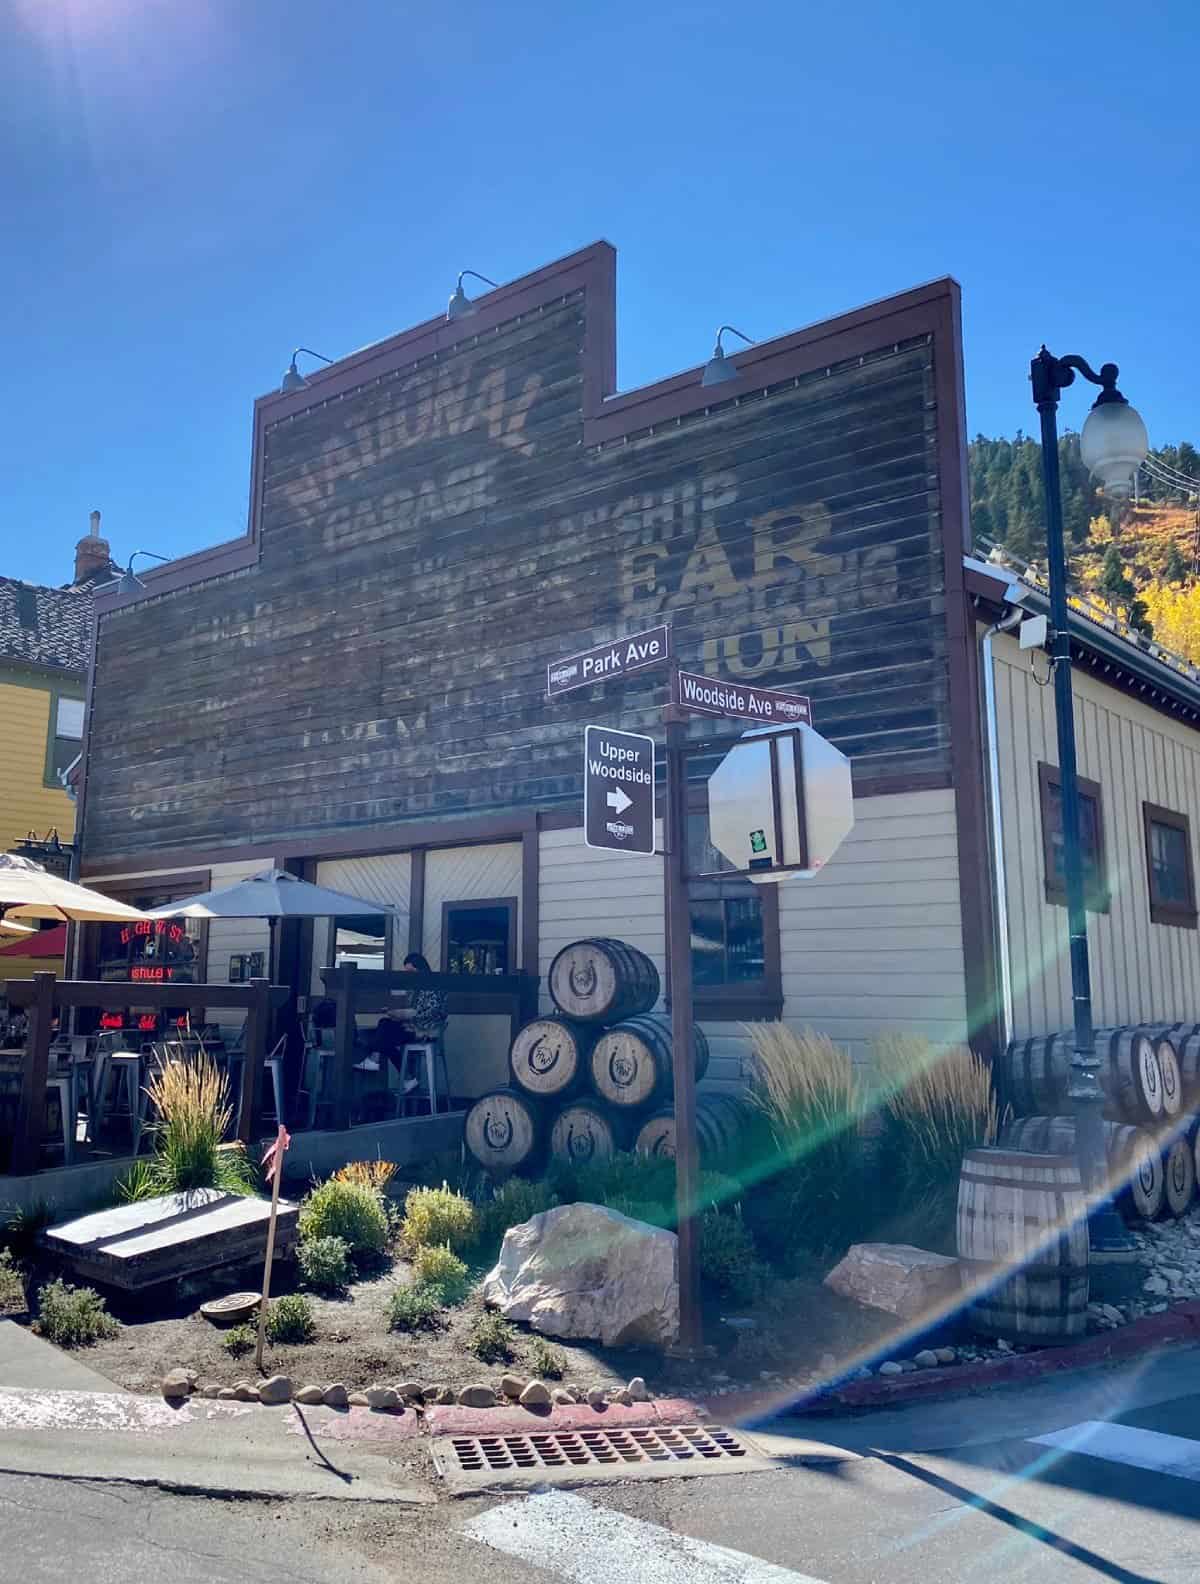 Things to do in Park City in the fall - explore the charming downtown - High West Distillery & Saloon